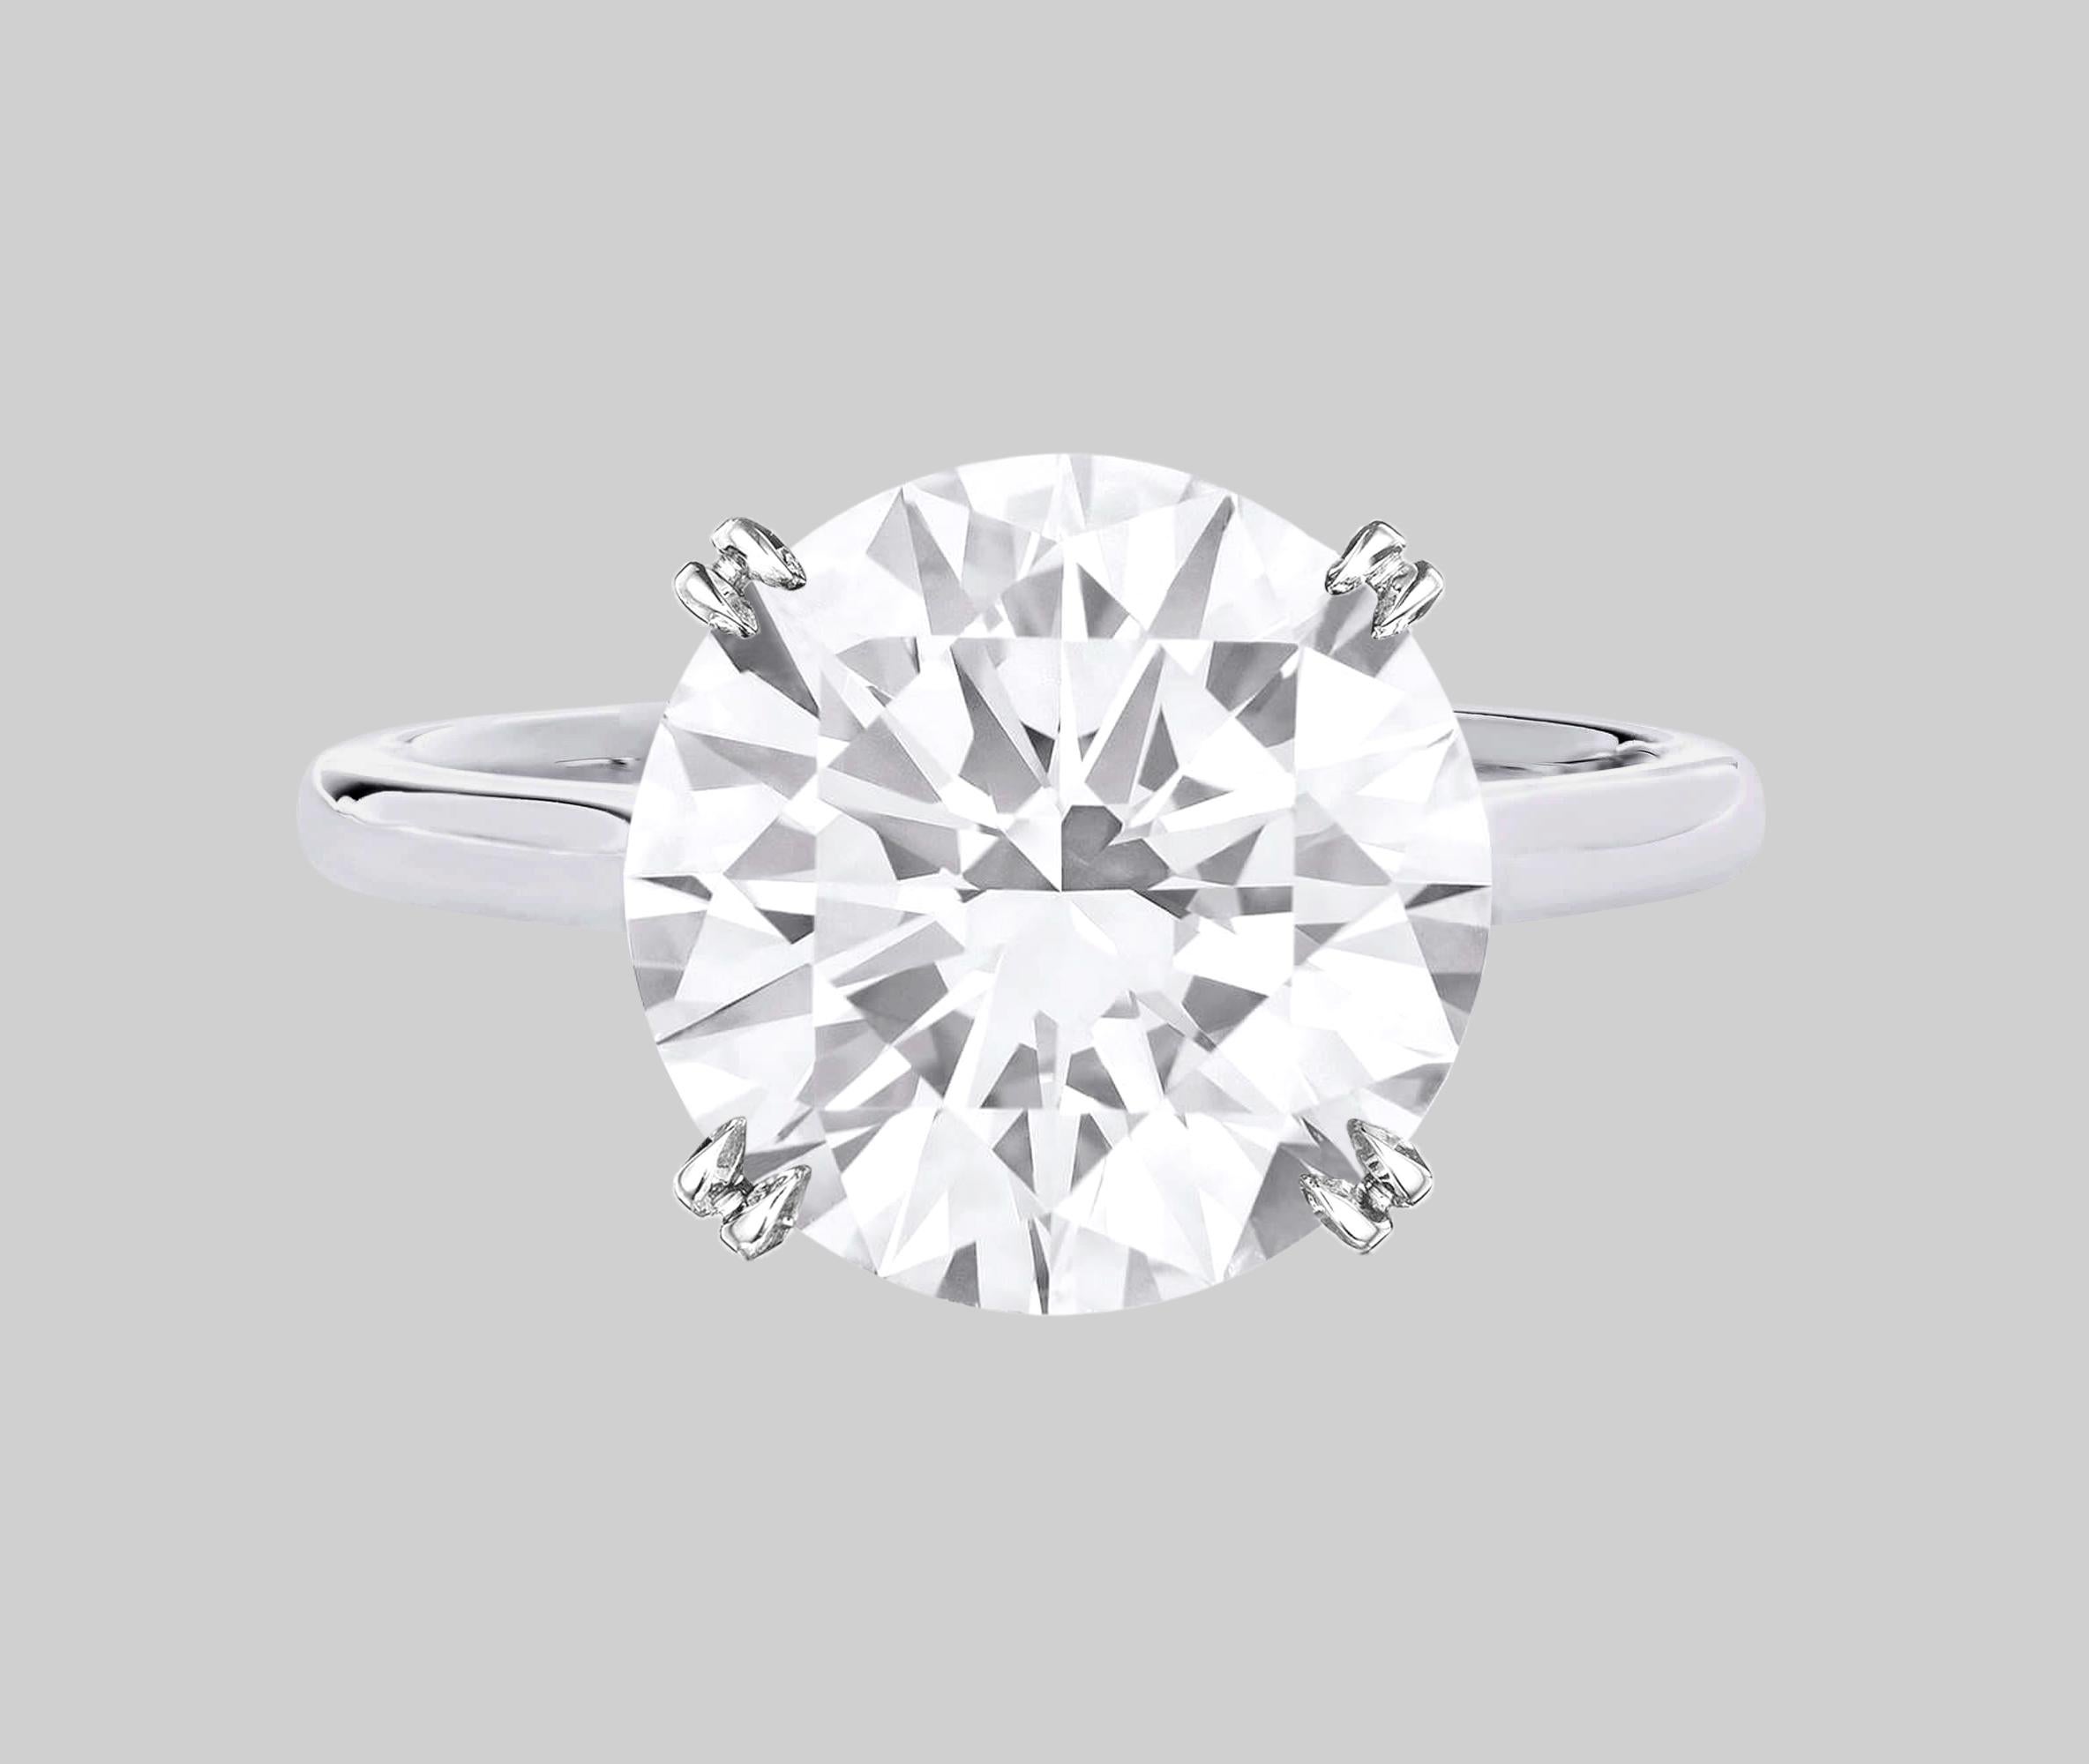 GIA Certified 4 Carat Round Brilliant Cut Diamond Platinum Ring

dazzling and substantial 4 carat round brilliant cut diamond is bright white, completely eye clean, and impeccably finished! Cut with absolutely ideal proportions, it displays truly